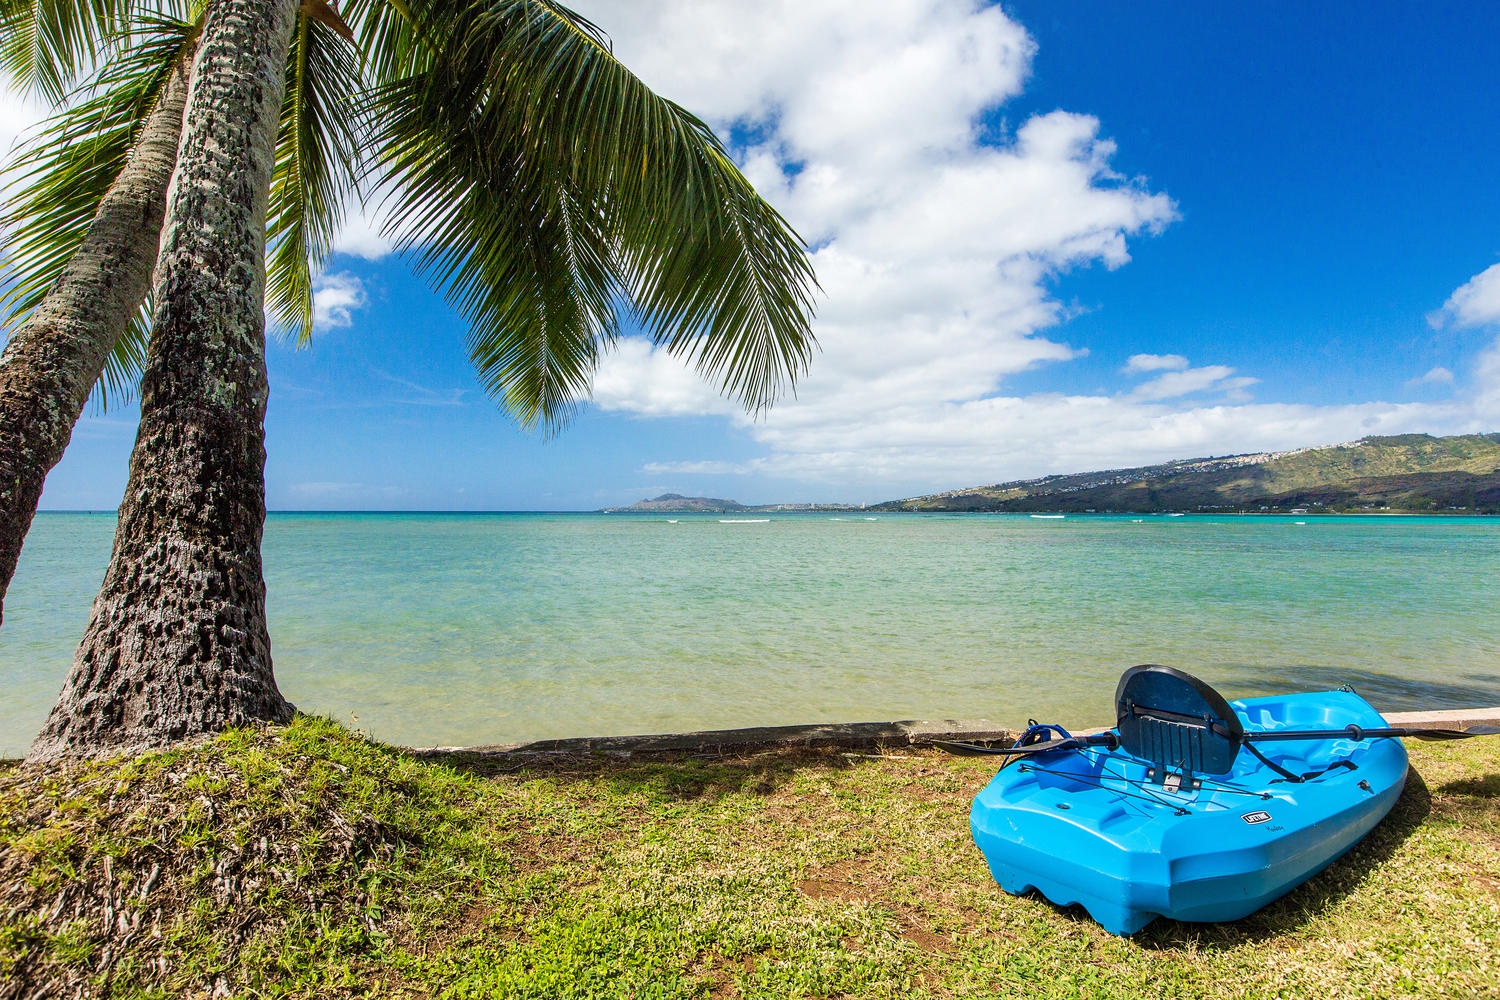 Honolulu Vacation Rentals, Hale Kai - Just a minute kayak or walk away, you will find a sandy, quiet beach.